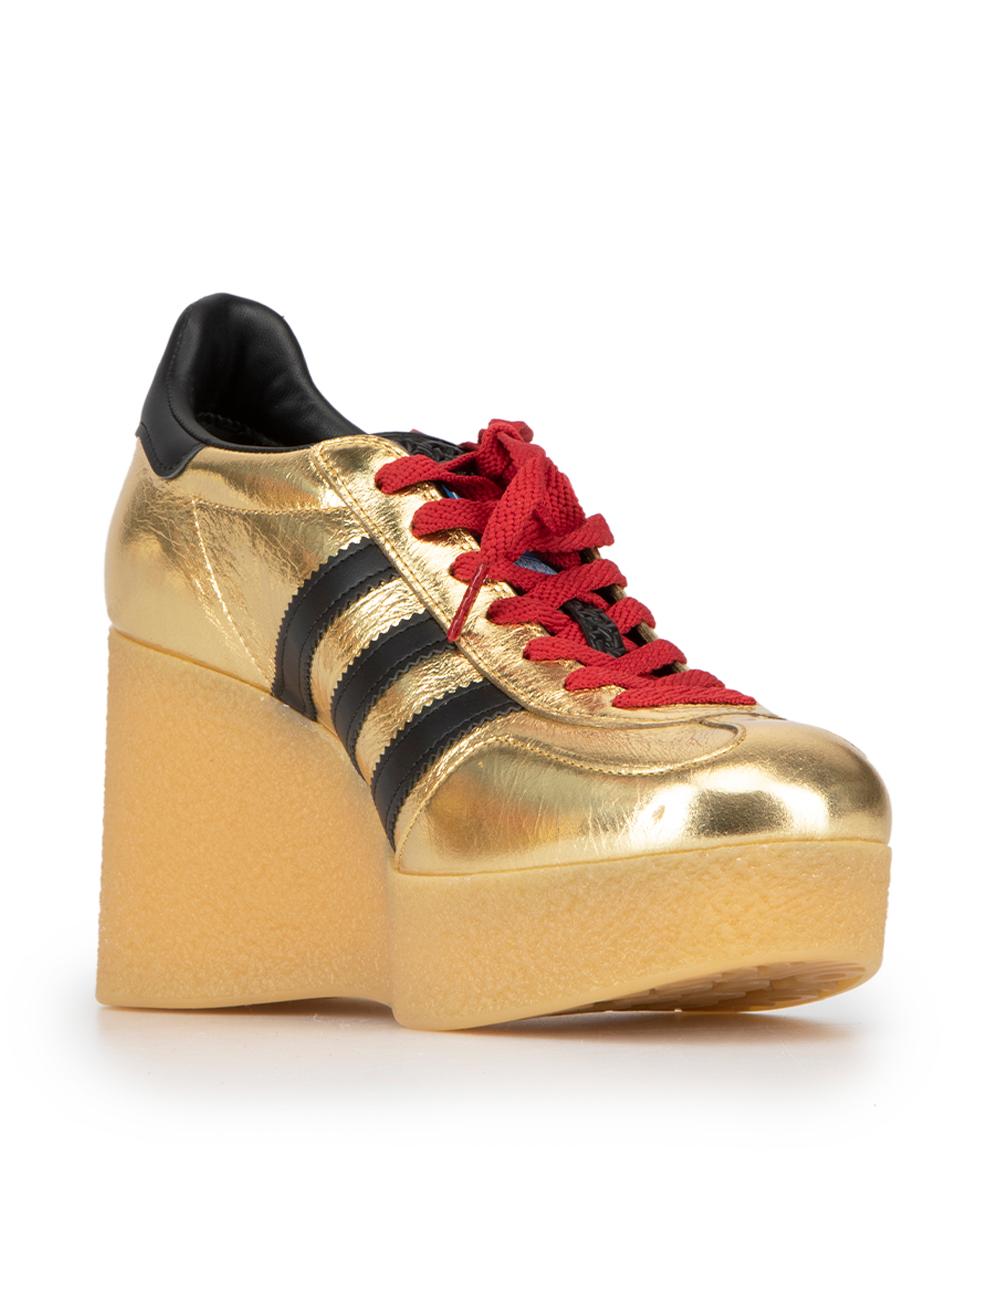 CONDITION is Never Worn. No visible wear to shoes is evident on this used Gucci x Adidas designer resale item. 



Details


Gold

Leather

Low top trainers

Round toe

Wedge high rubber heel

Gucci Trefoil logo label and heel tab

Lace up